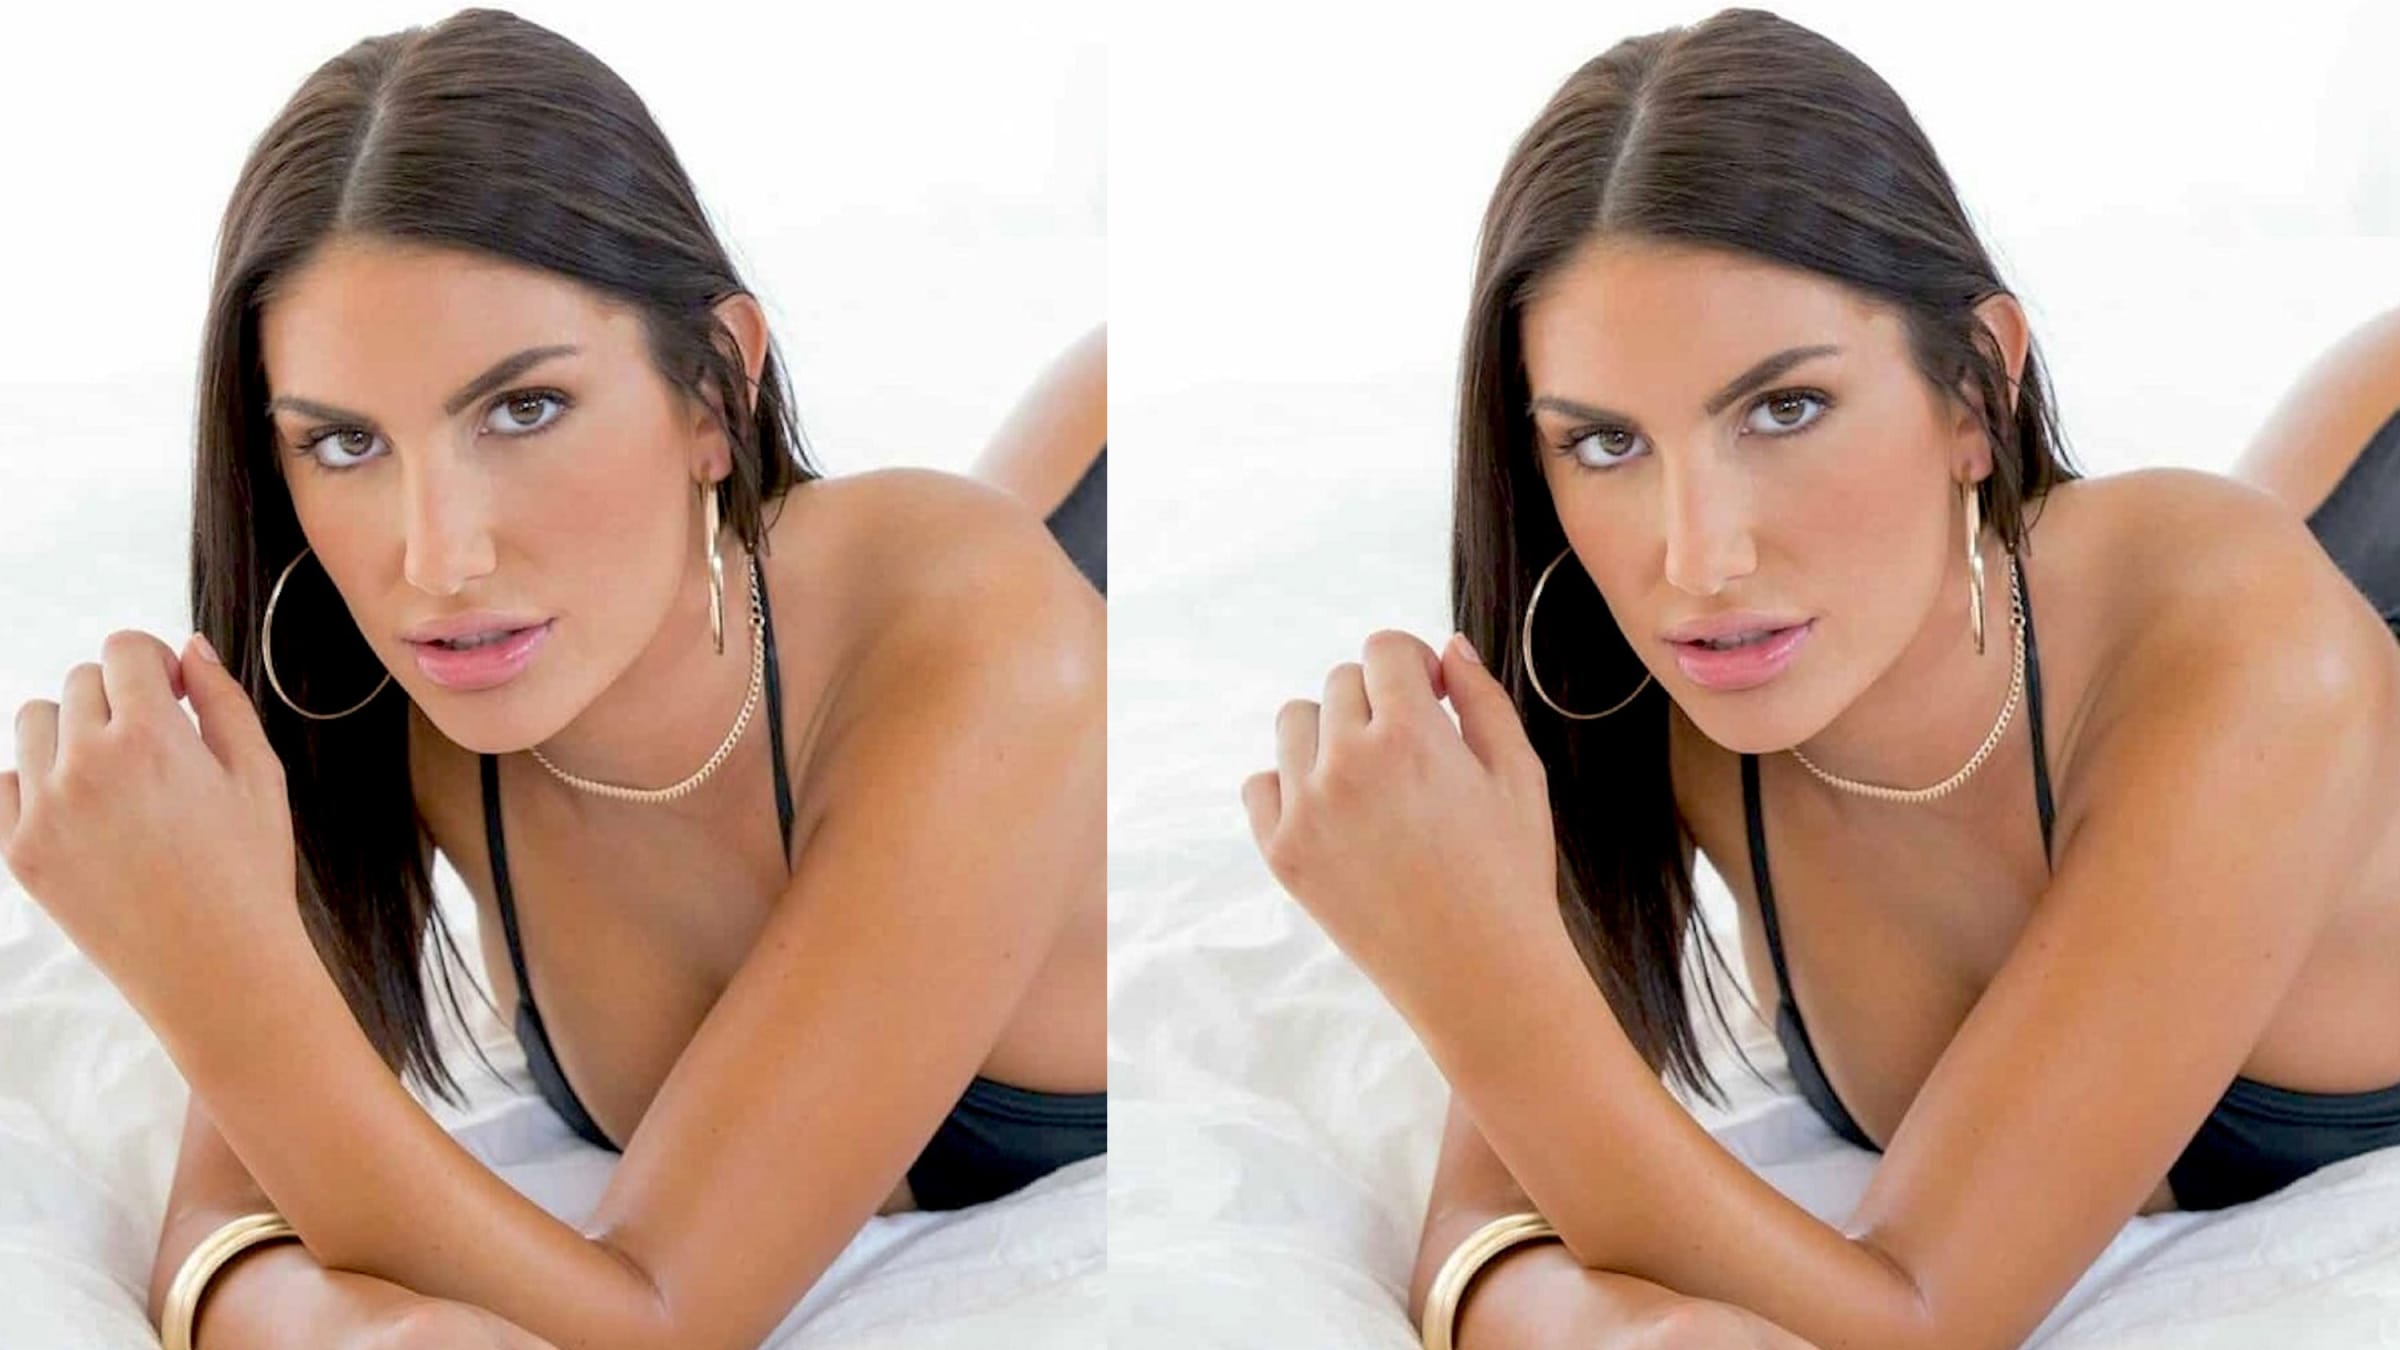 Mom Help Dad Rape Daughter - Mother of 'Cyberbullied' Porn Star August Ames Opens Up About Her Last Days